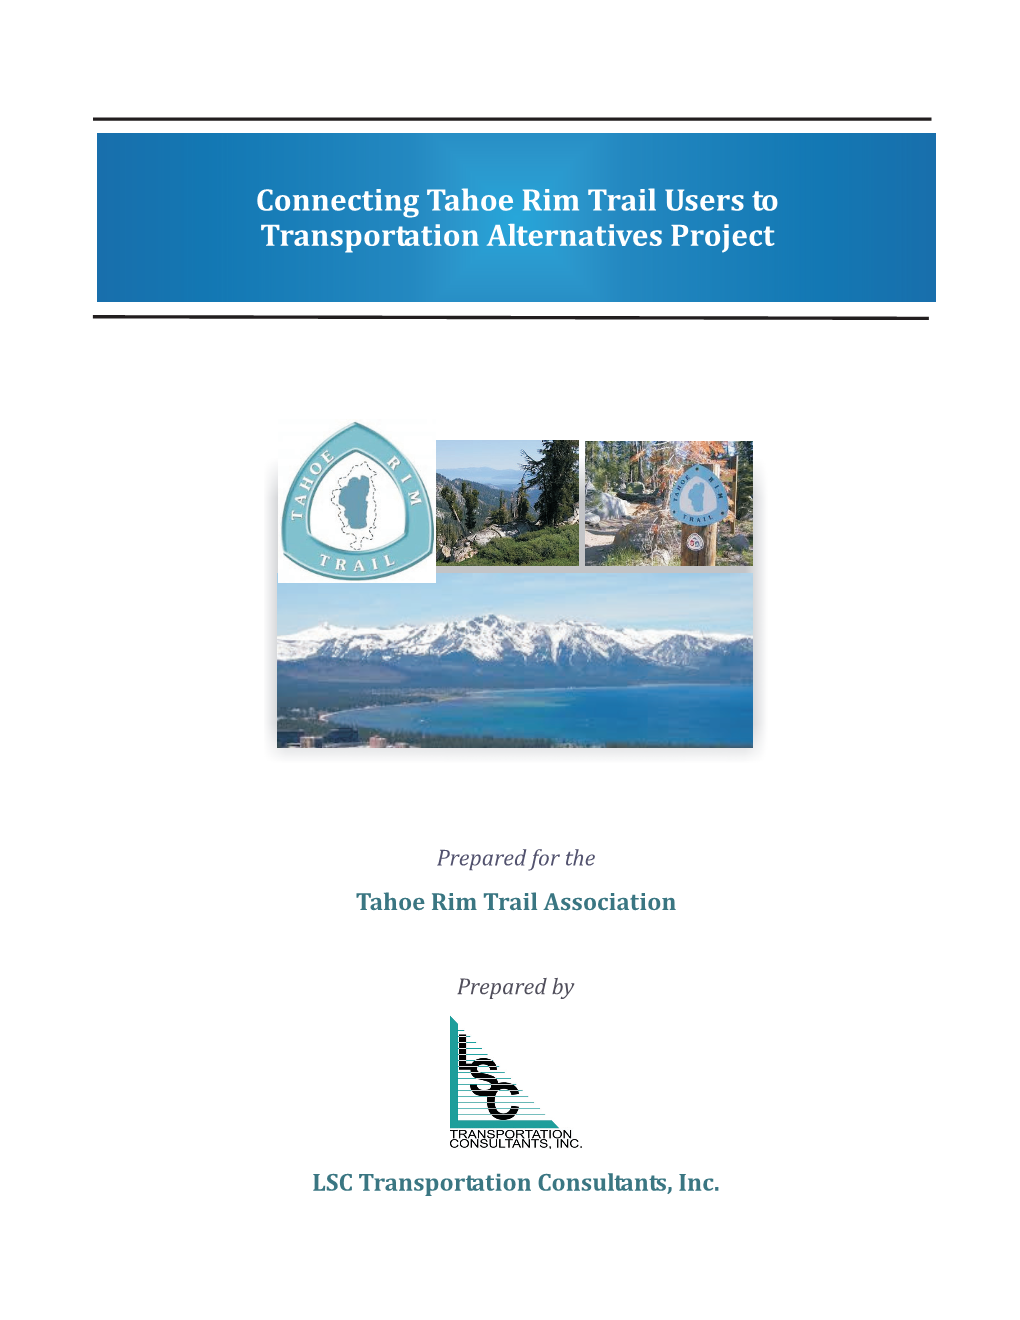 Connecting Tahoe Rim Trail Users to Transportation Alternatives Project